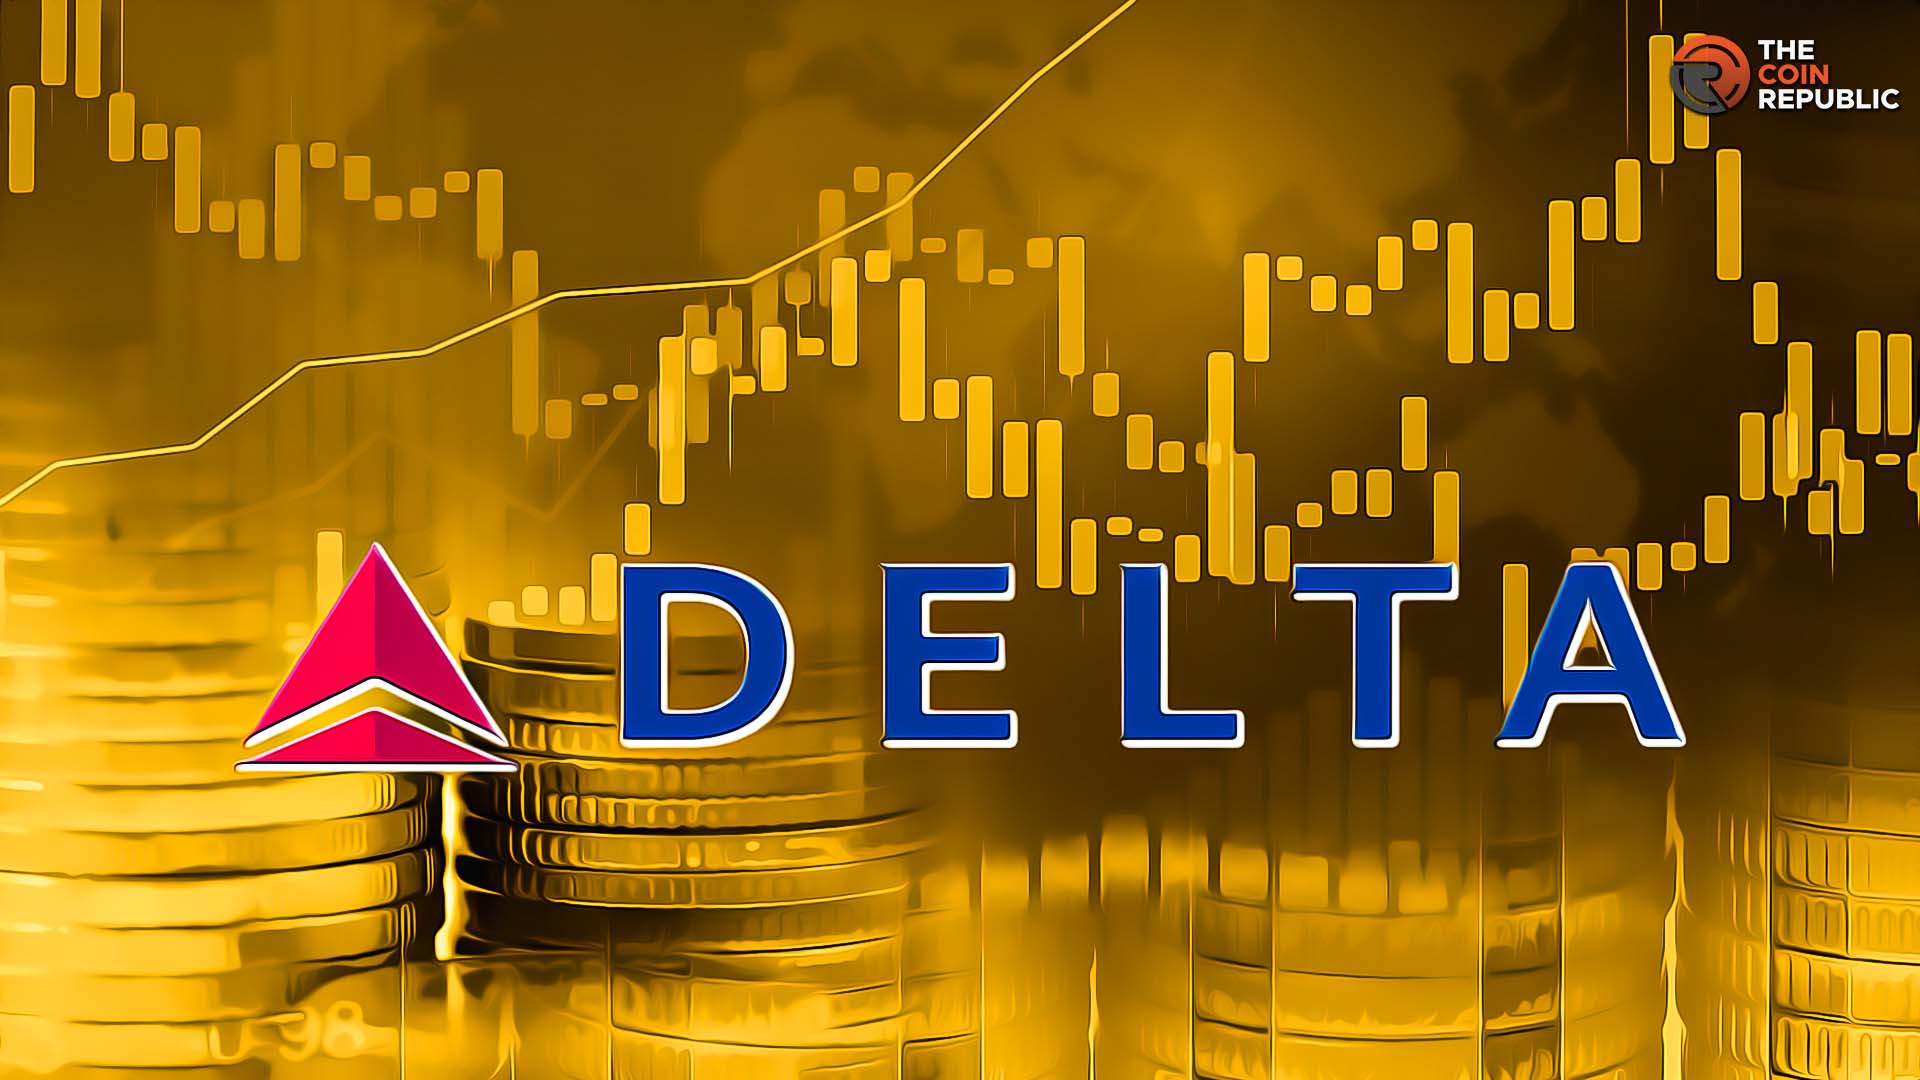 Delta Air Lines Stock Continues to Surge, Will it Reach $50?